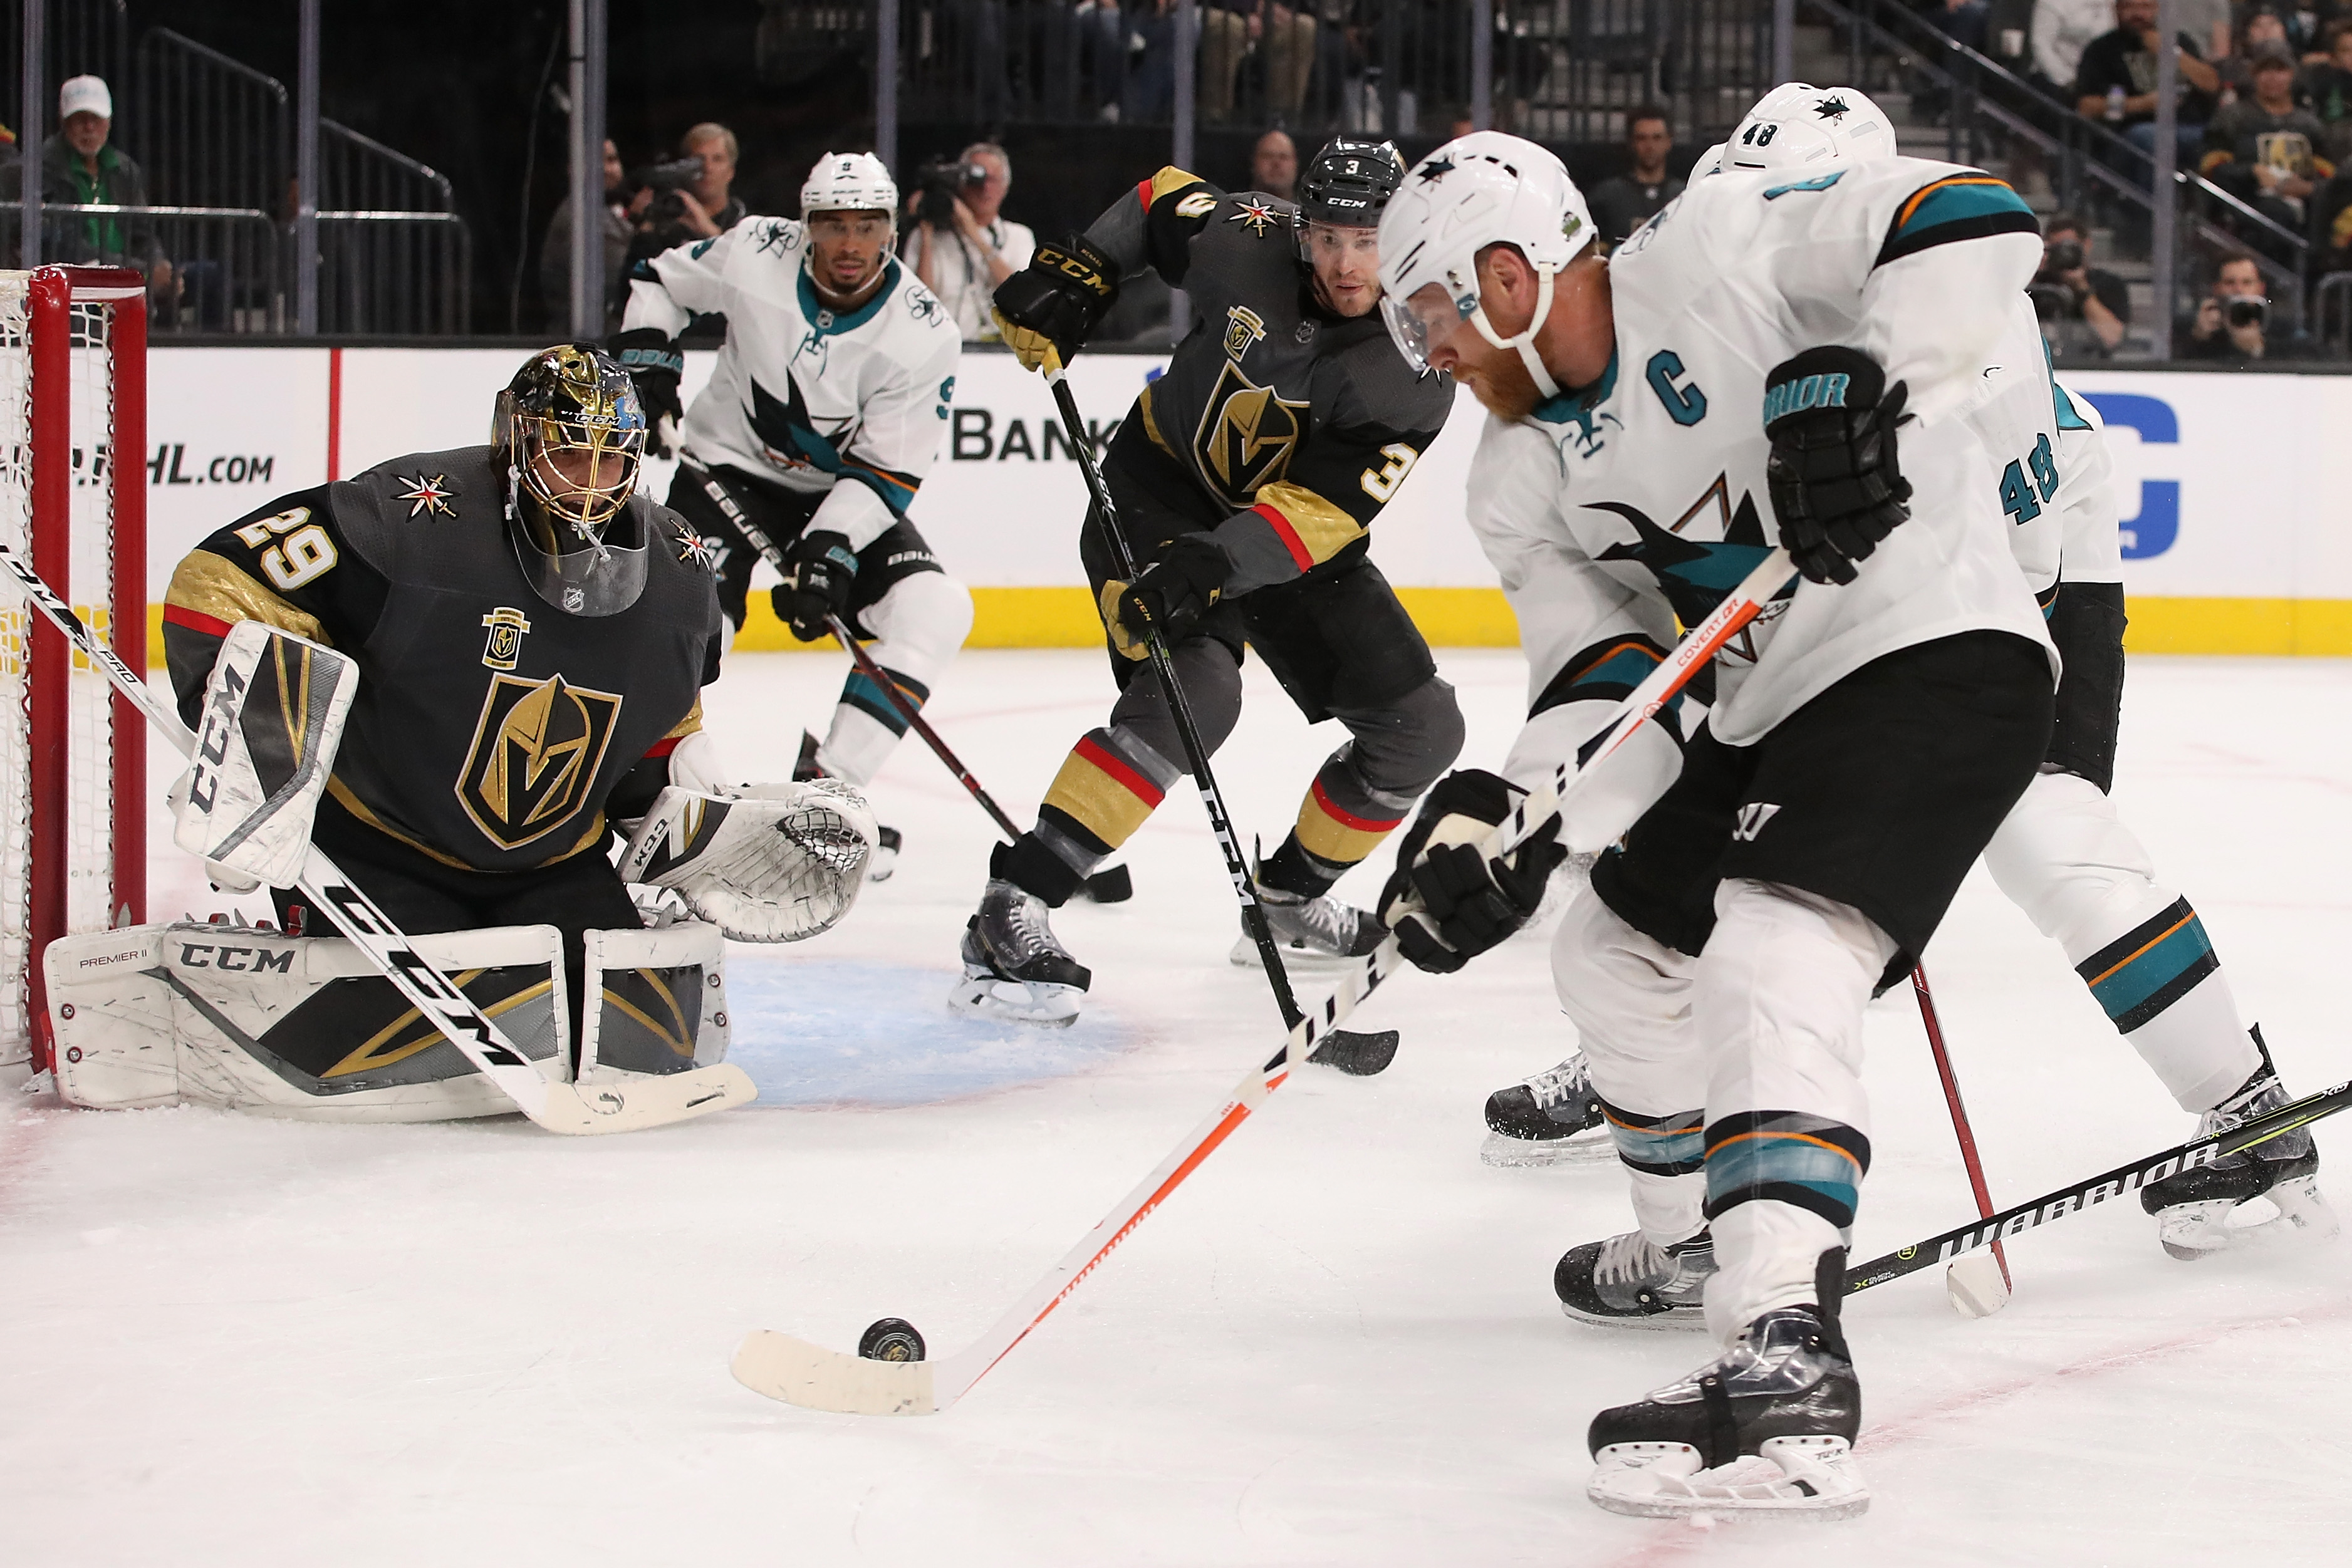 GLENDALE, NV - APRIL 26: Goaltender Marc-Andre Fleury #29 of the Vegas Golden Knights prepares to make a save on Joe Pavelski #8 of the San Jose Sharks in the first period Game One of the Western Conference Second Round during the 2018 NHL Stanley Cup Pla